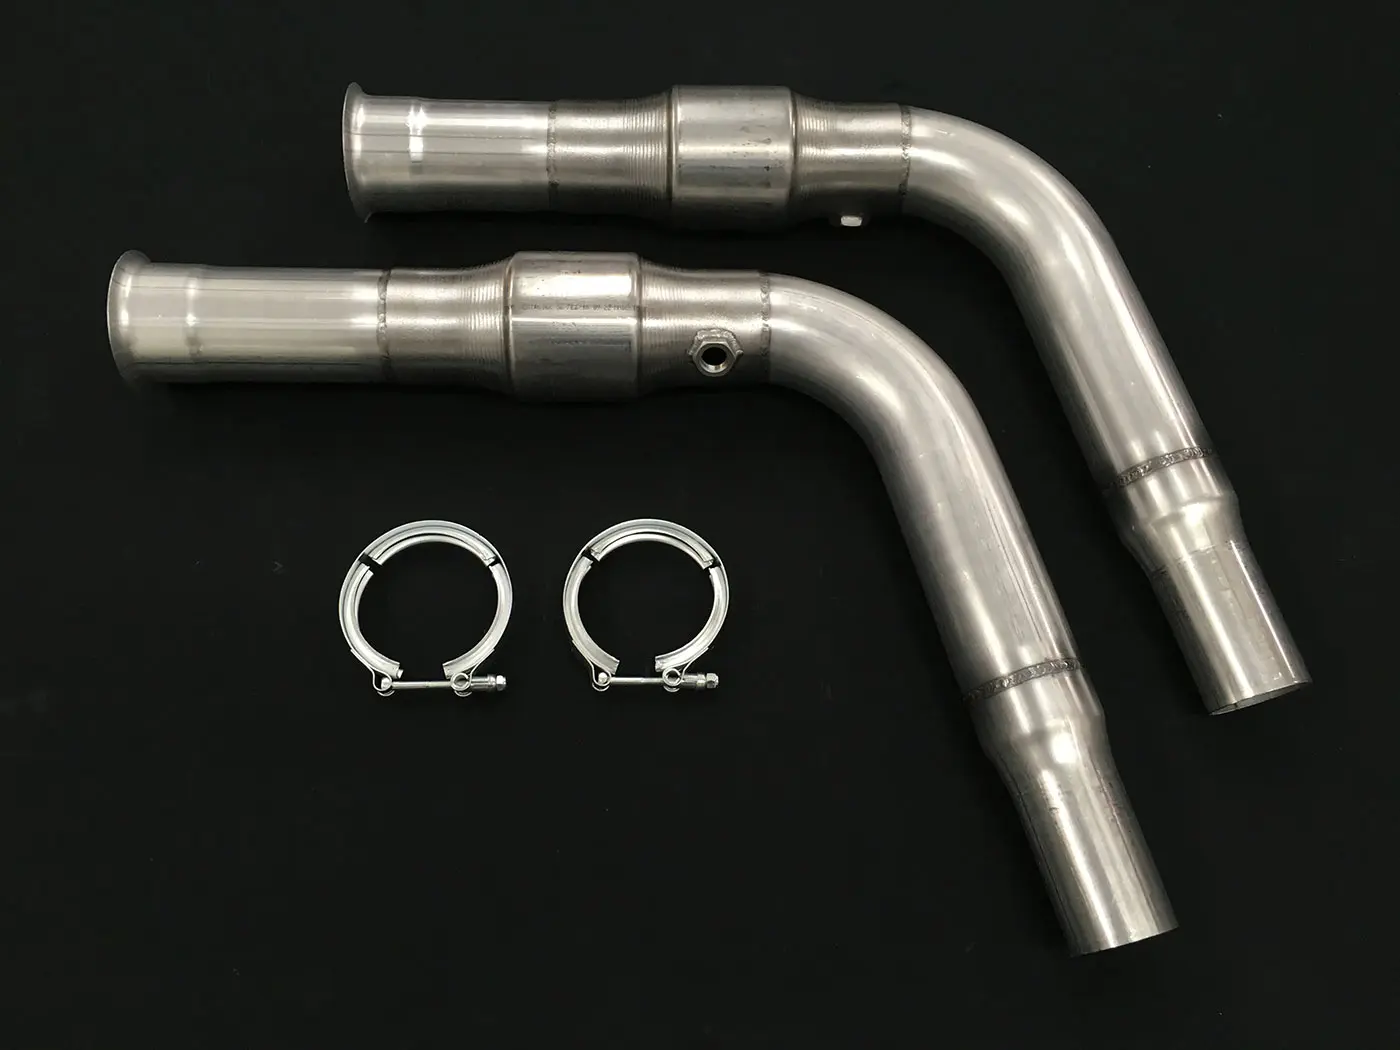 A pair of exhaust pipes with two clamps attached.